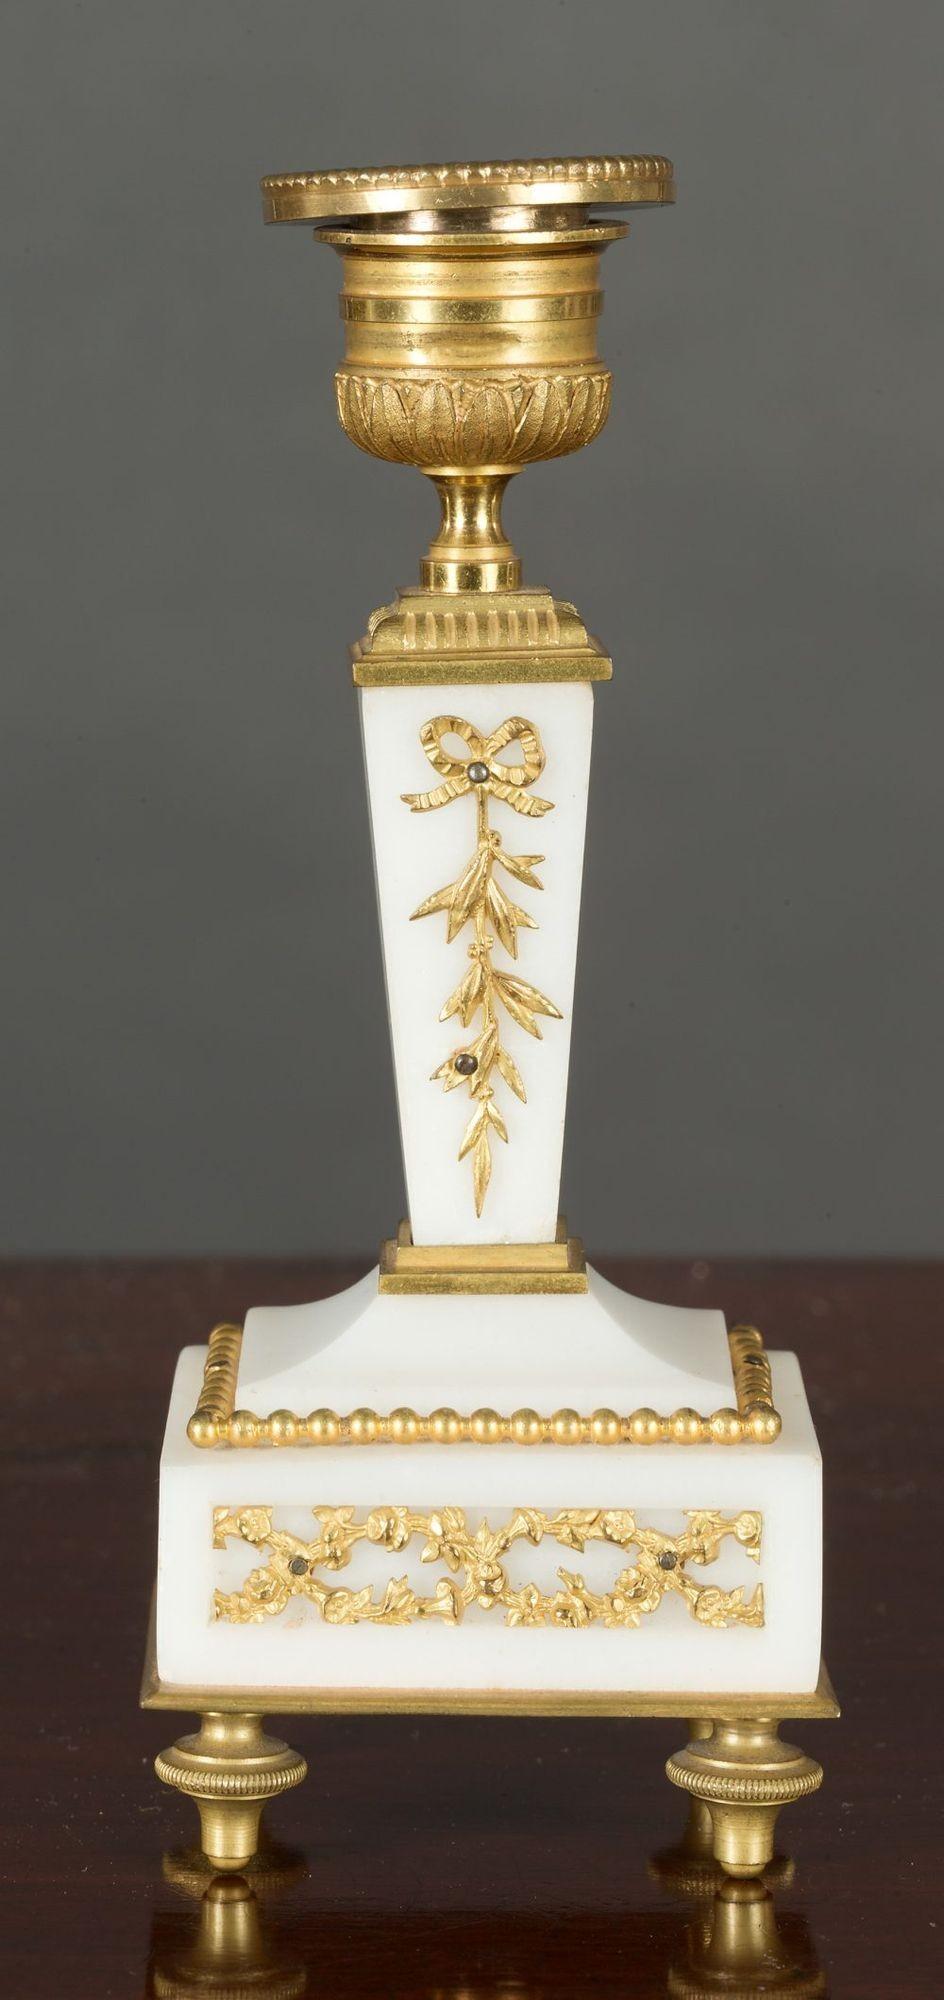 Miniature French white marble garniture with gilded beaded and frieze decoration.
 
Enamel dial with Arabic numerals and original gilded hands.
 
Eight day French movement with platform escapement. C.1890
The clock measures: Height 7.25 inches      